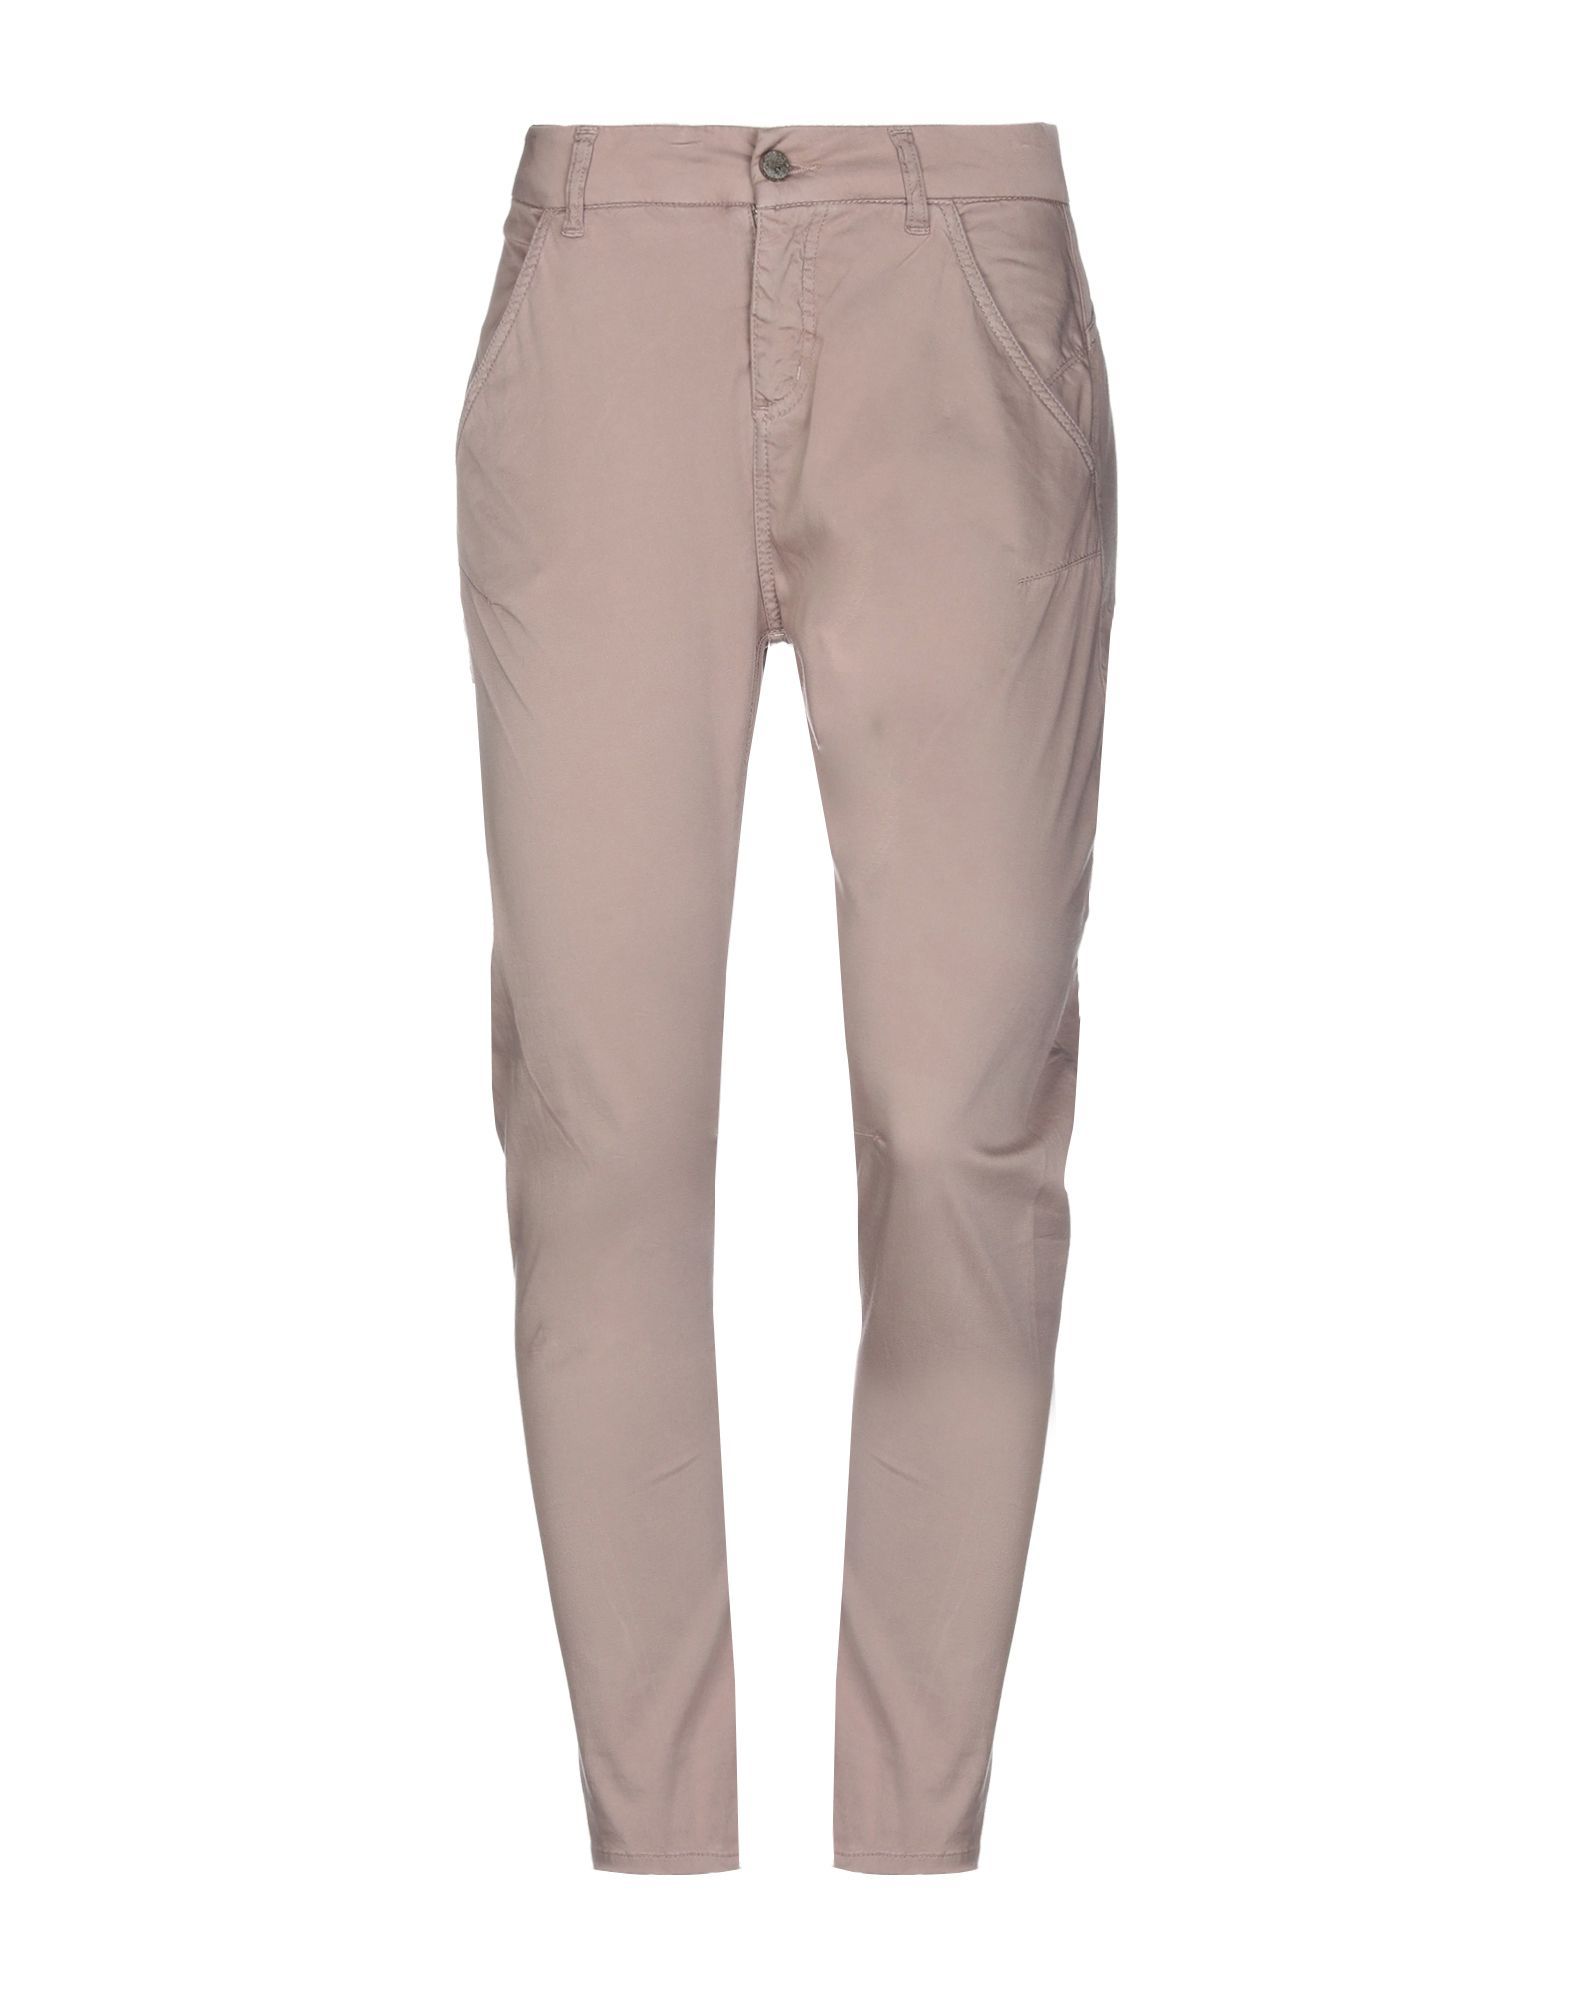 plain weave, logo, basic solid colour, high waisted, regular fit, tapered leg, button, zip, multipockets, stretch, pants